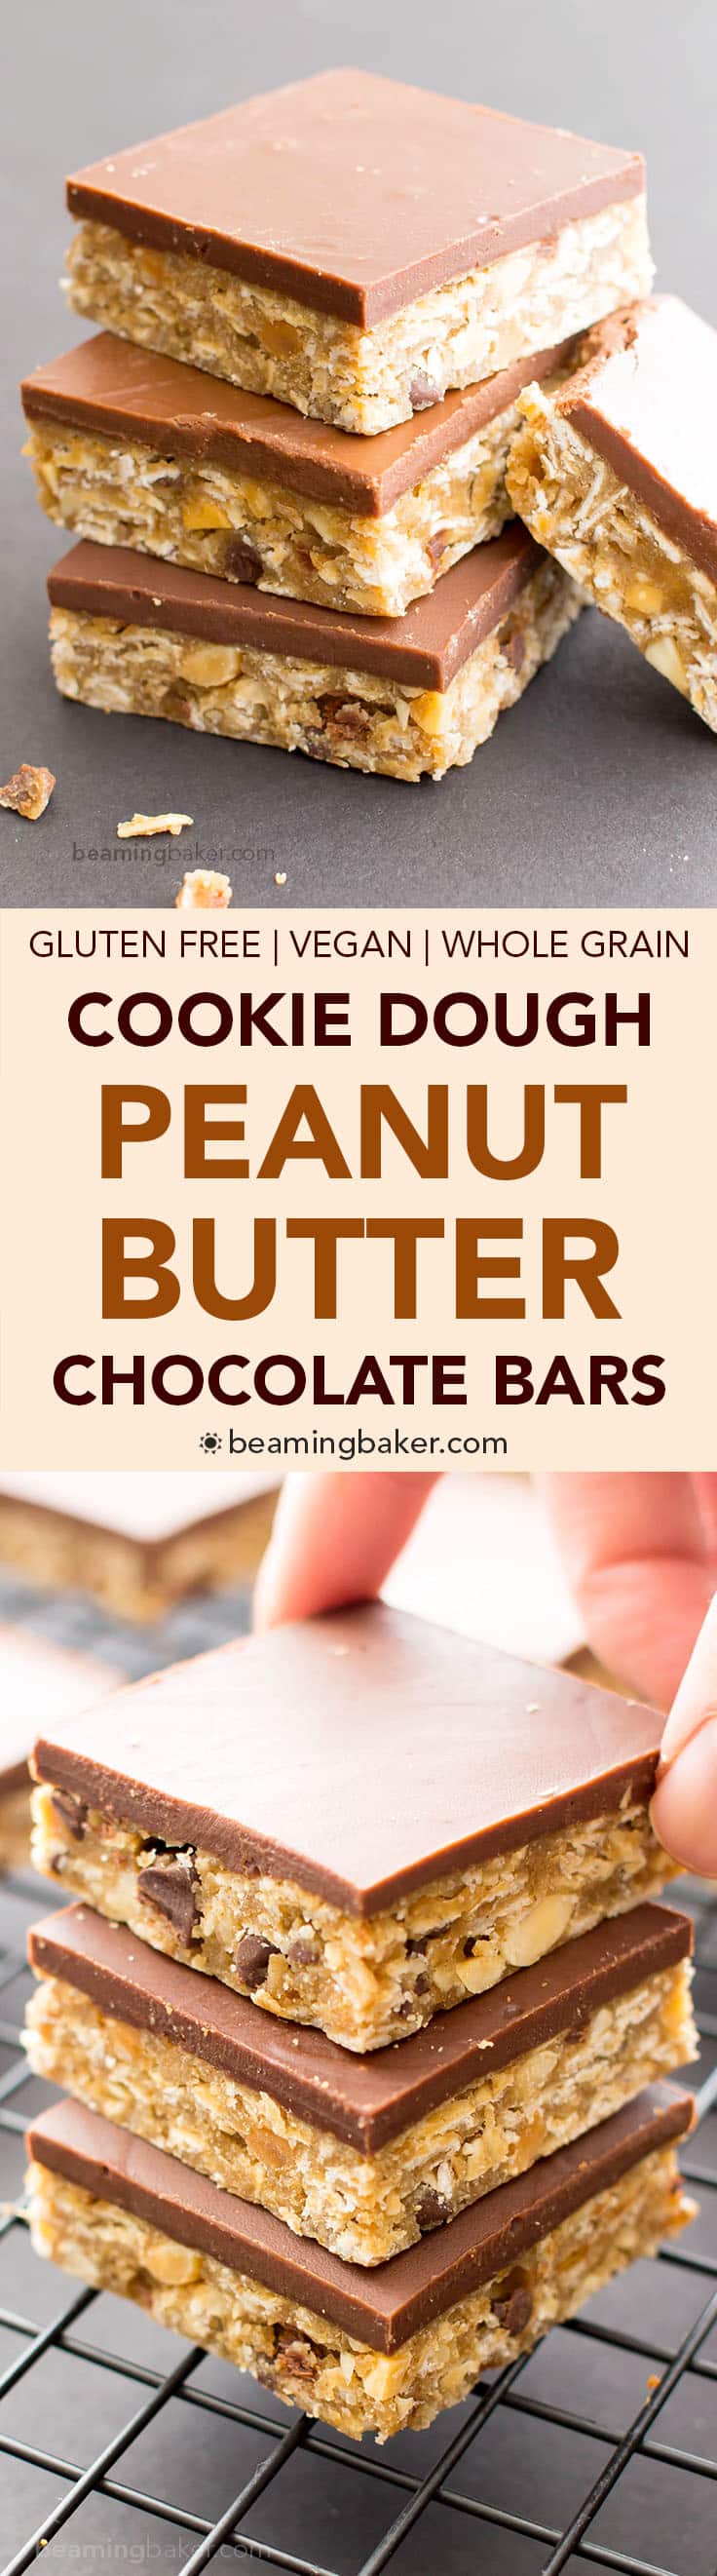 No Bake Chocolate Peanut Butter Oatmeal Cookie Dough Bars (V, GF, DF): an easy recipe for decadent peanut butter cookie dough bars topped with a thick layer of chocolate and bursting with oats. #Vegan #GlutenFree #OatFlour #DairyFree | BeamingBaker.com